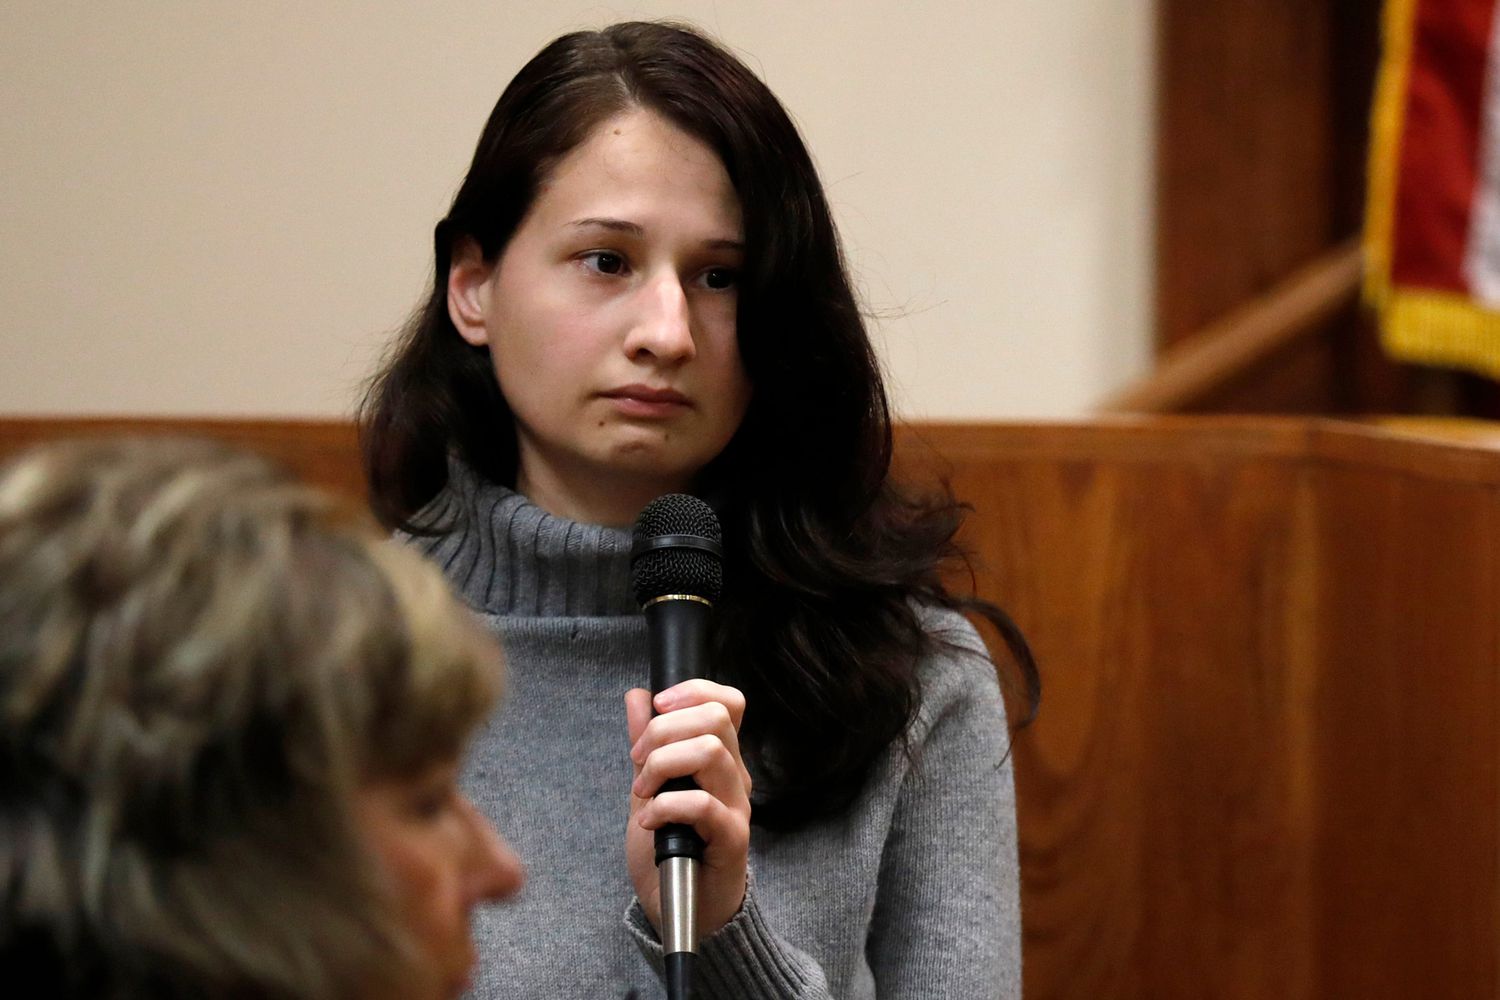 gypsy-rose-blanchard-reveals-shocking-details-about-solitary-confinement-experience